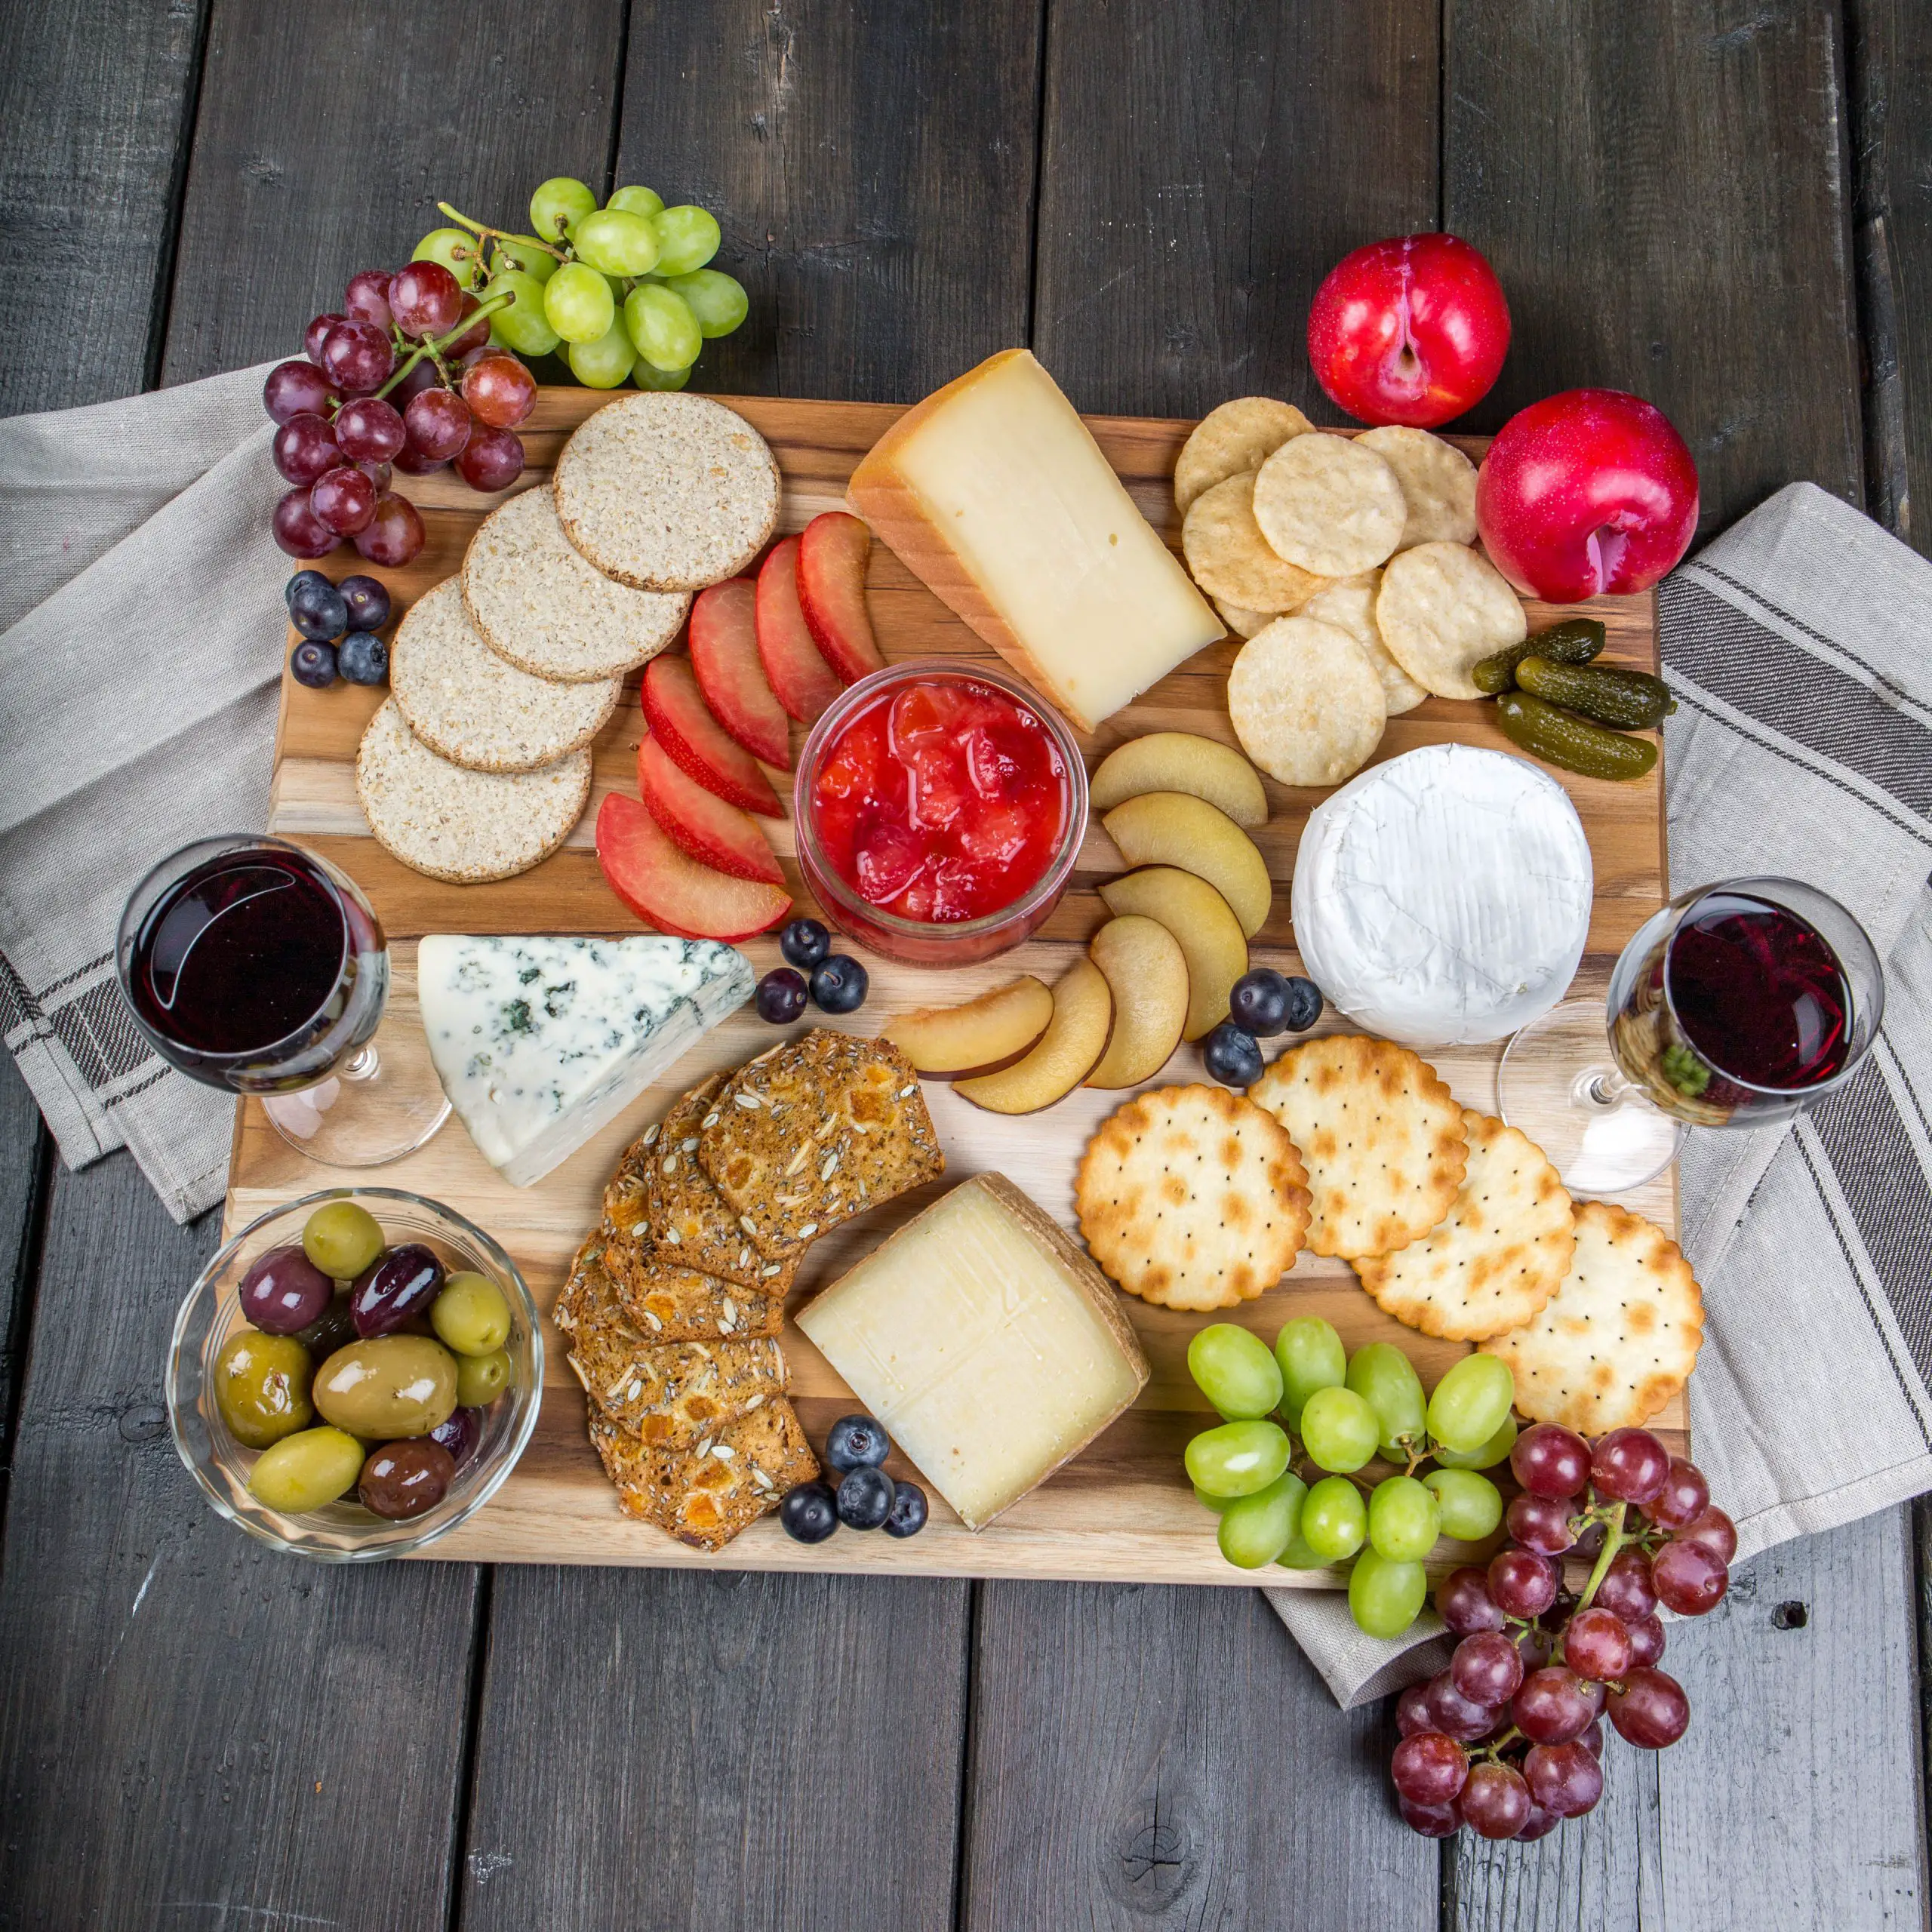 How To Build A Cheese Platter